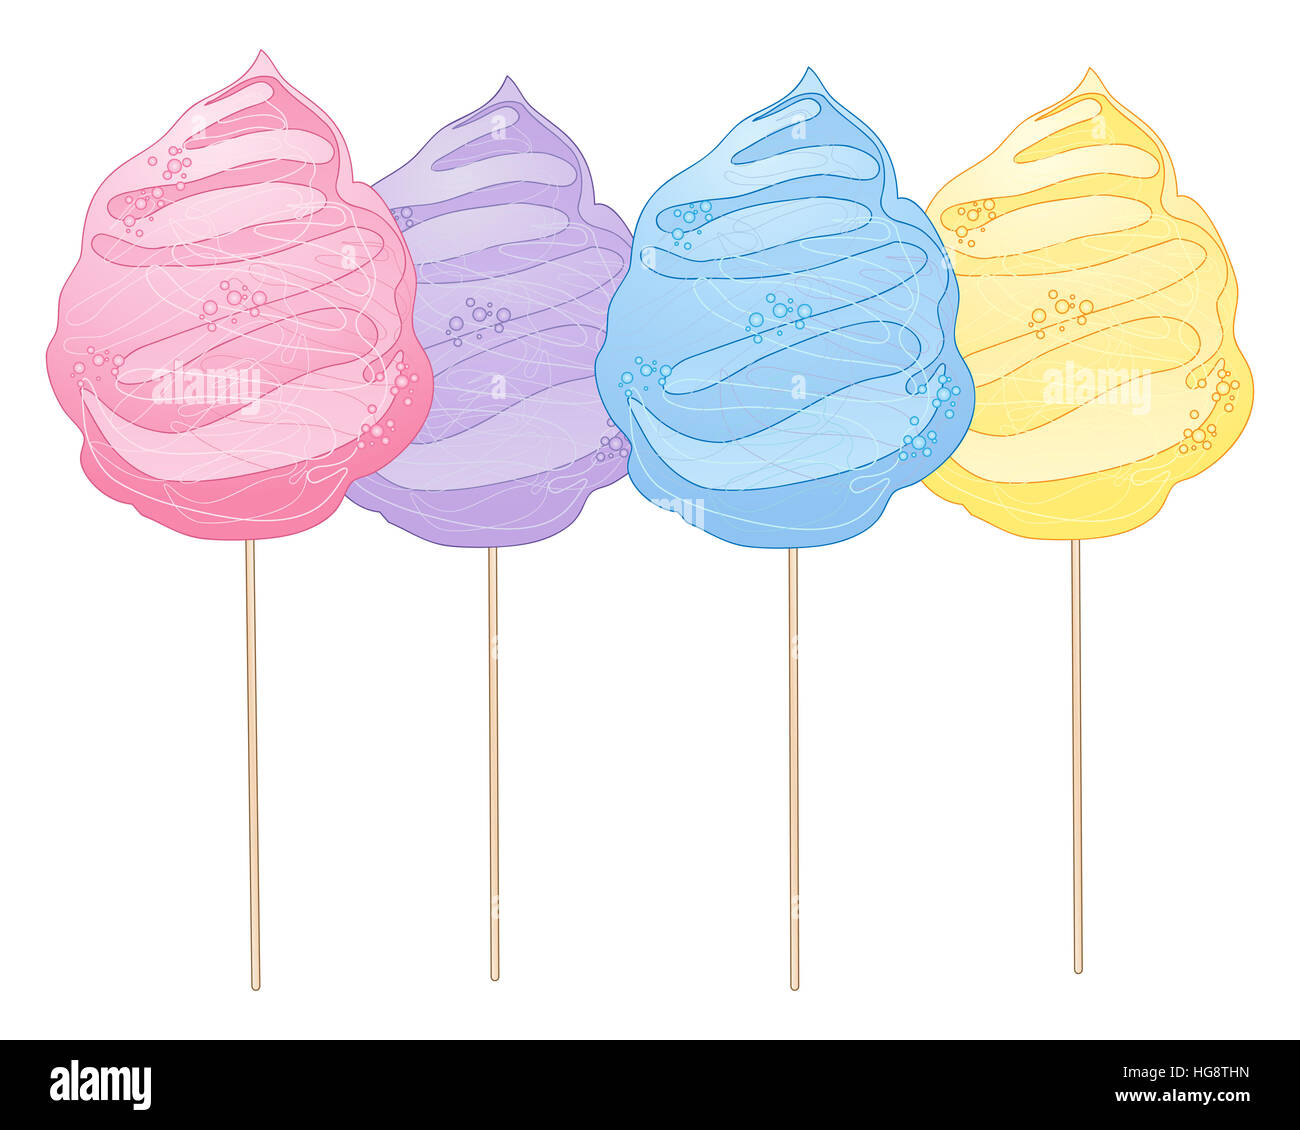 an illustration of four cotton candy treats in bright colors in advertisement format on a white background Stock Photo